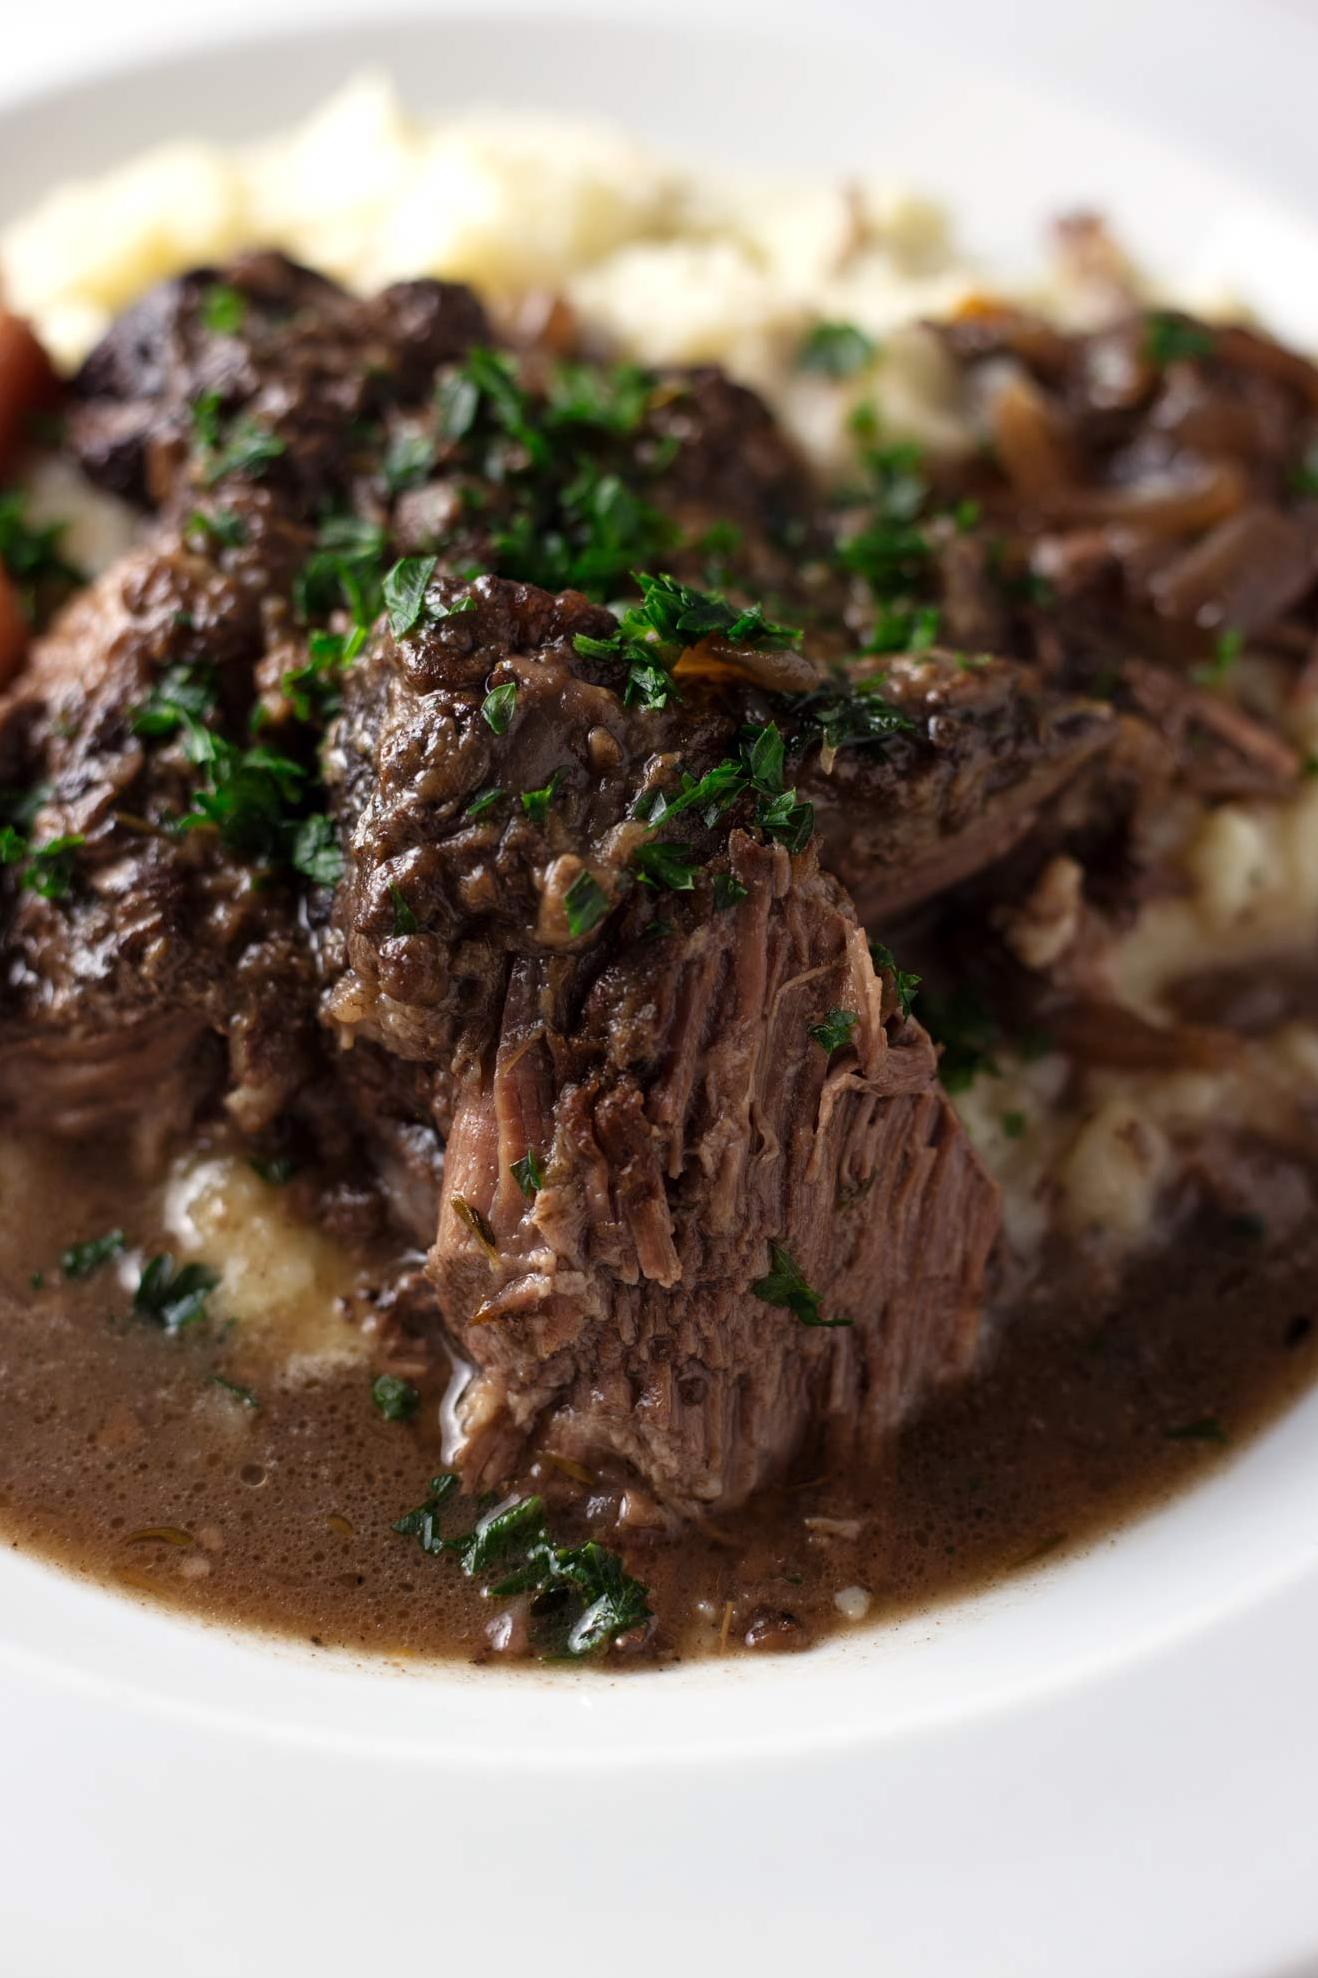  The savory aroma of garlic fills the air as the pot roast slowly simmers in a flavorful bath of red wine.